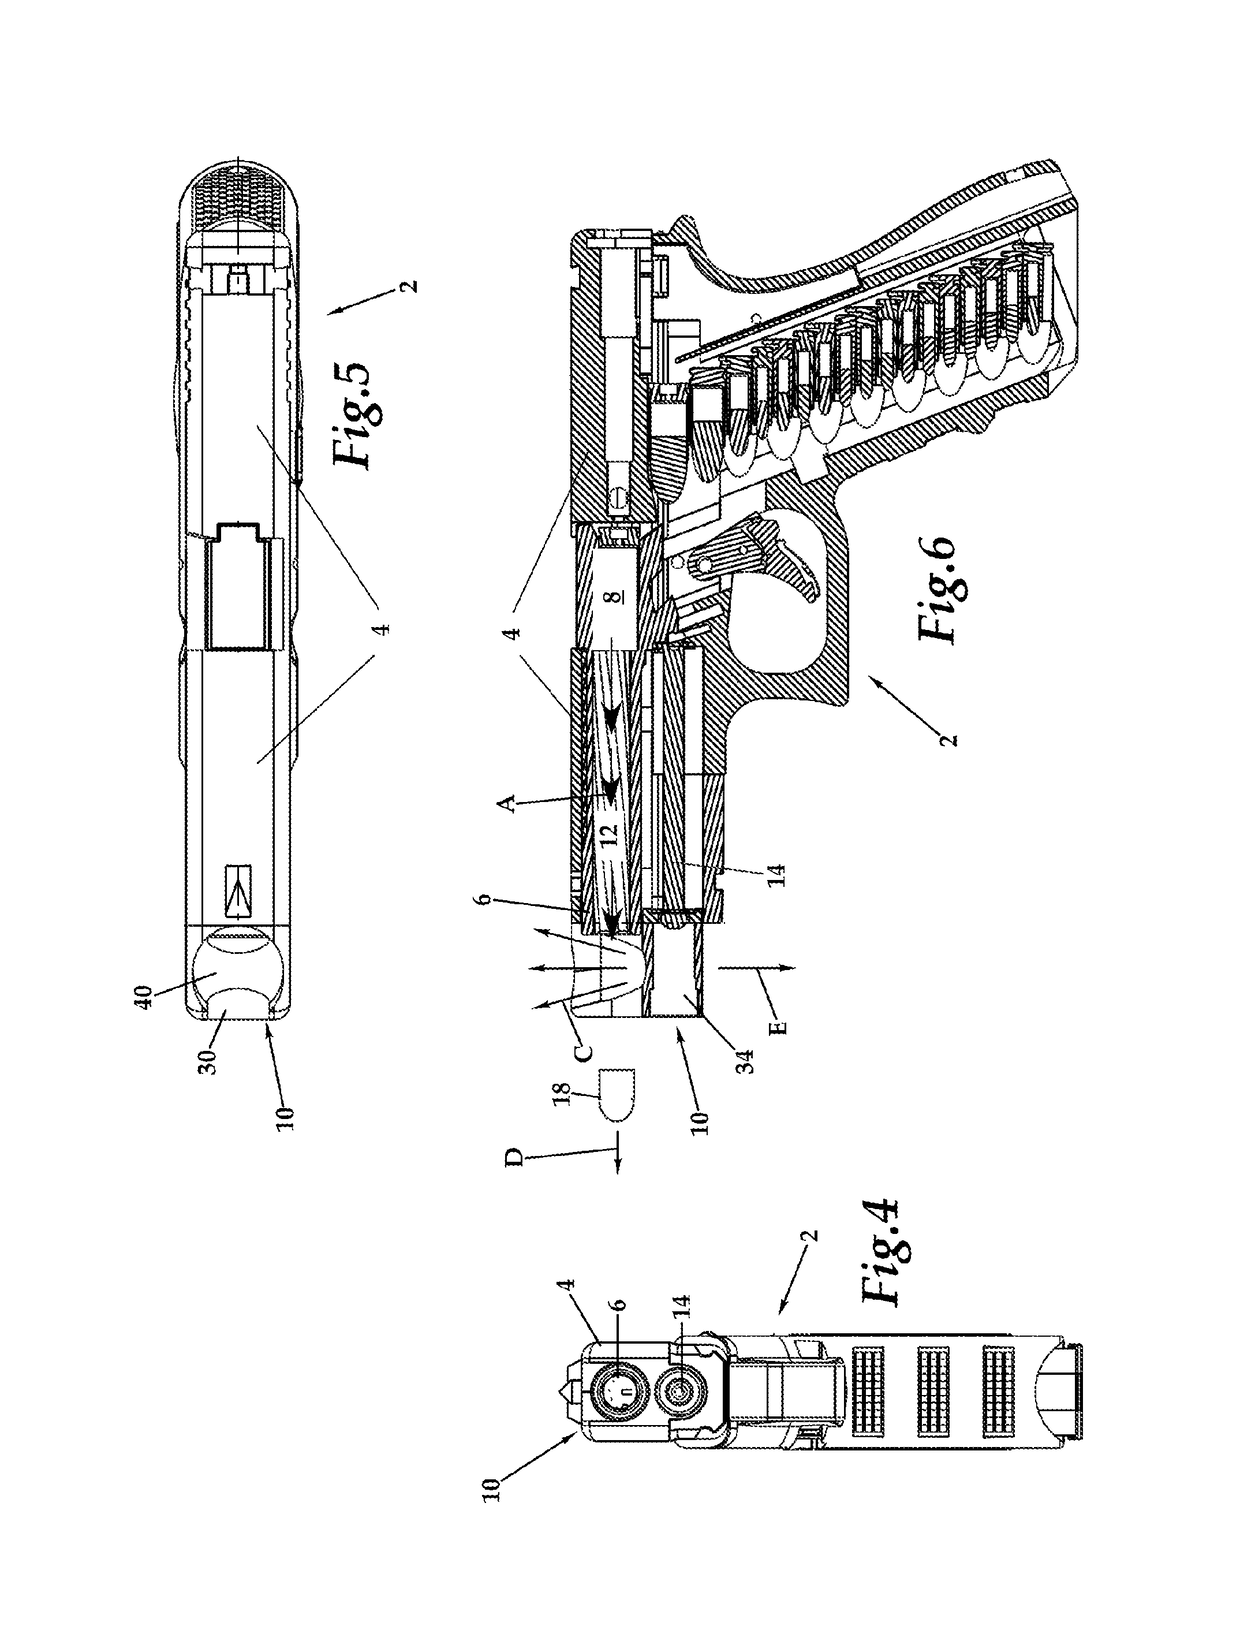 Muzzle brake with propelling nozzle for recoil control